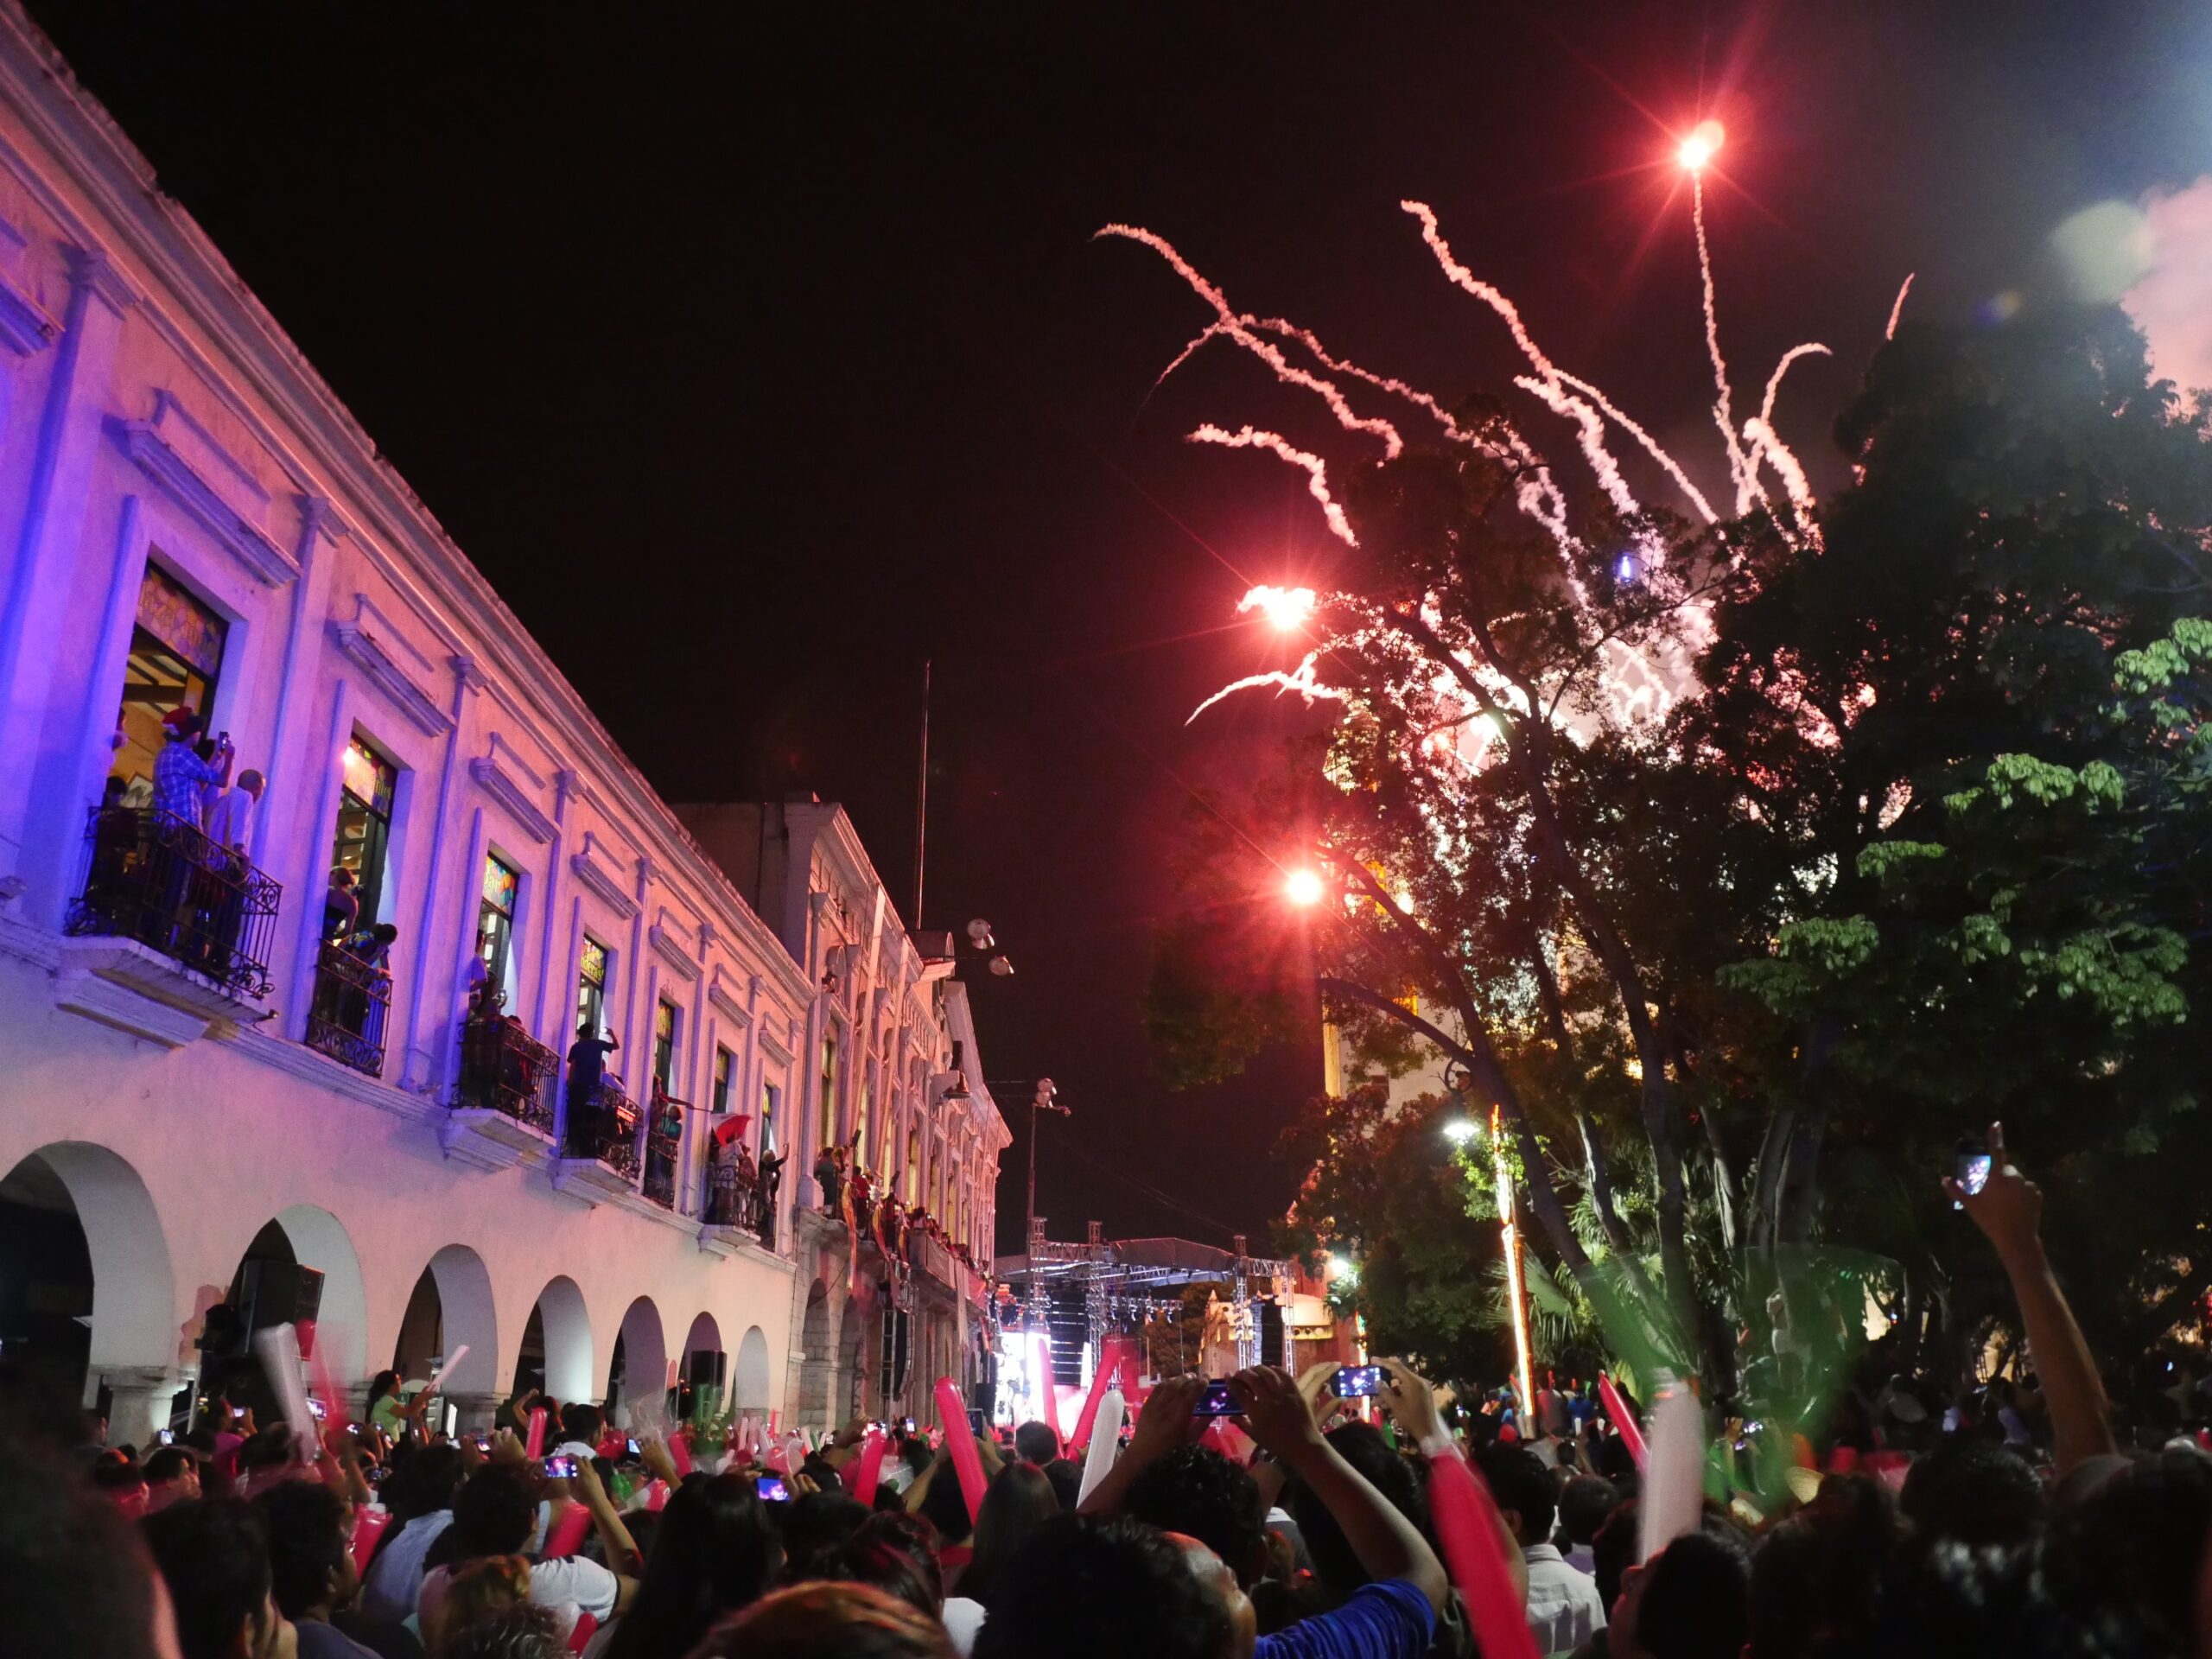 Mexicans watch fireworks explode in the sky above the Mérida Cathedral for Mexican Independence Day in Mérida, Mexico.